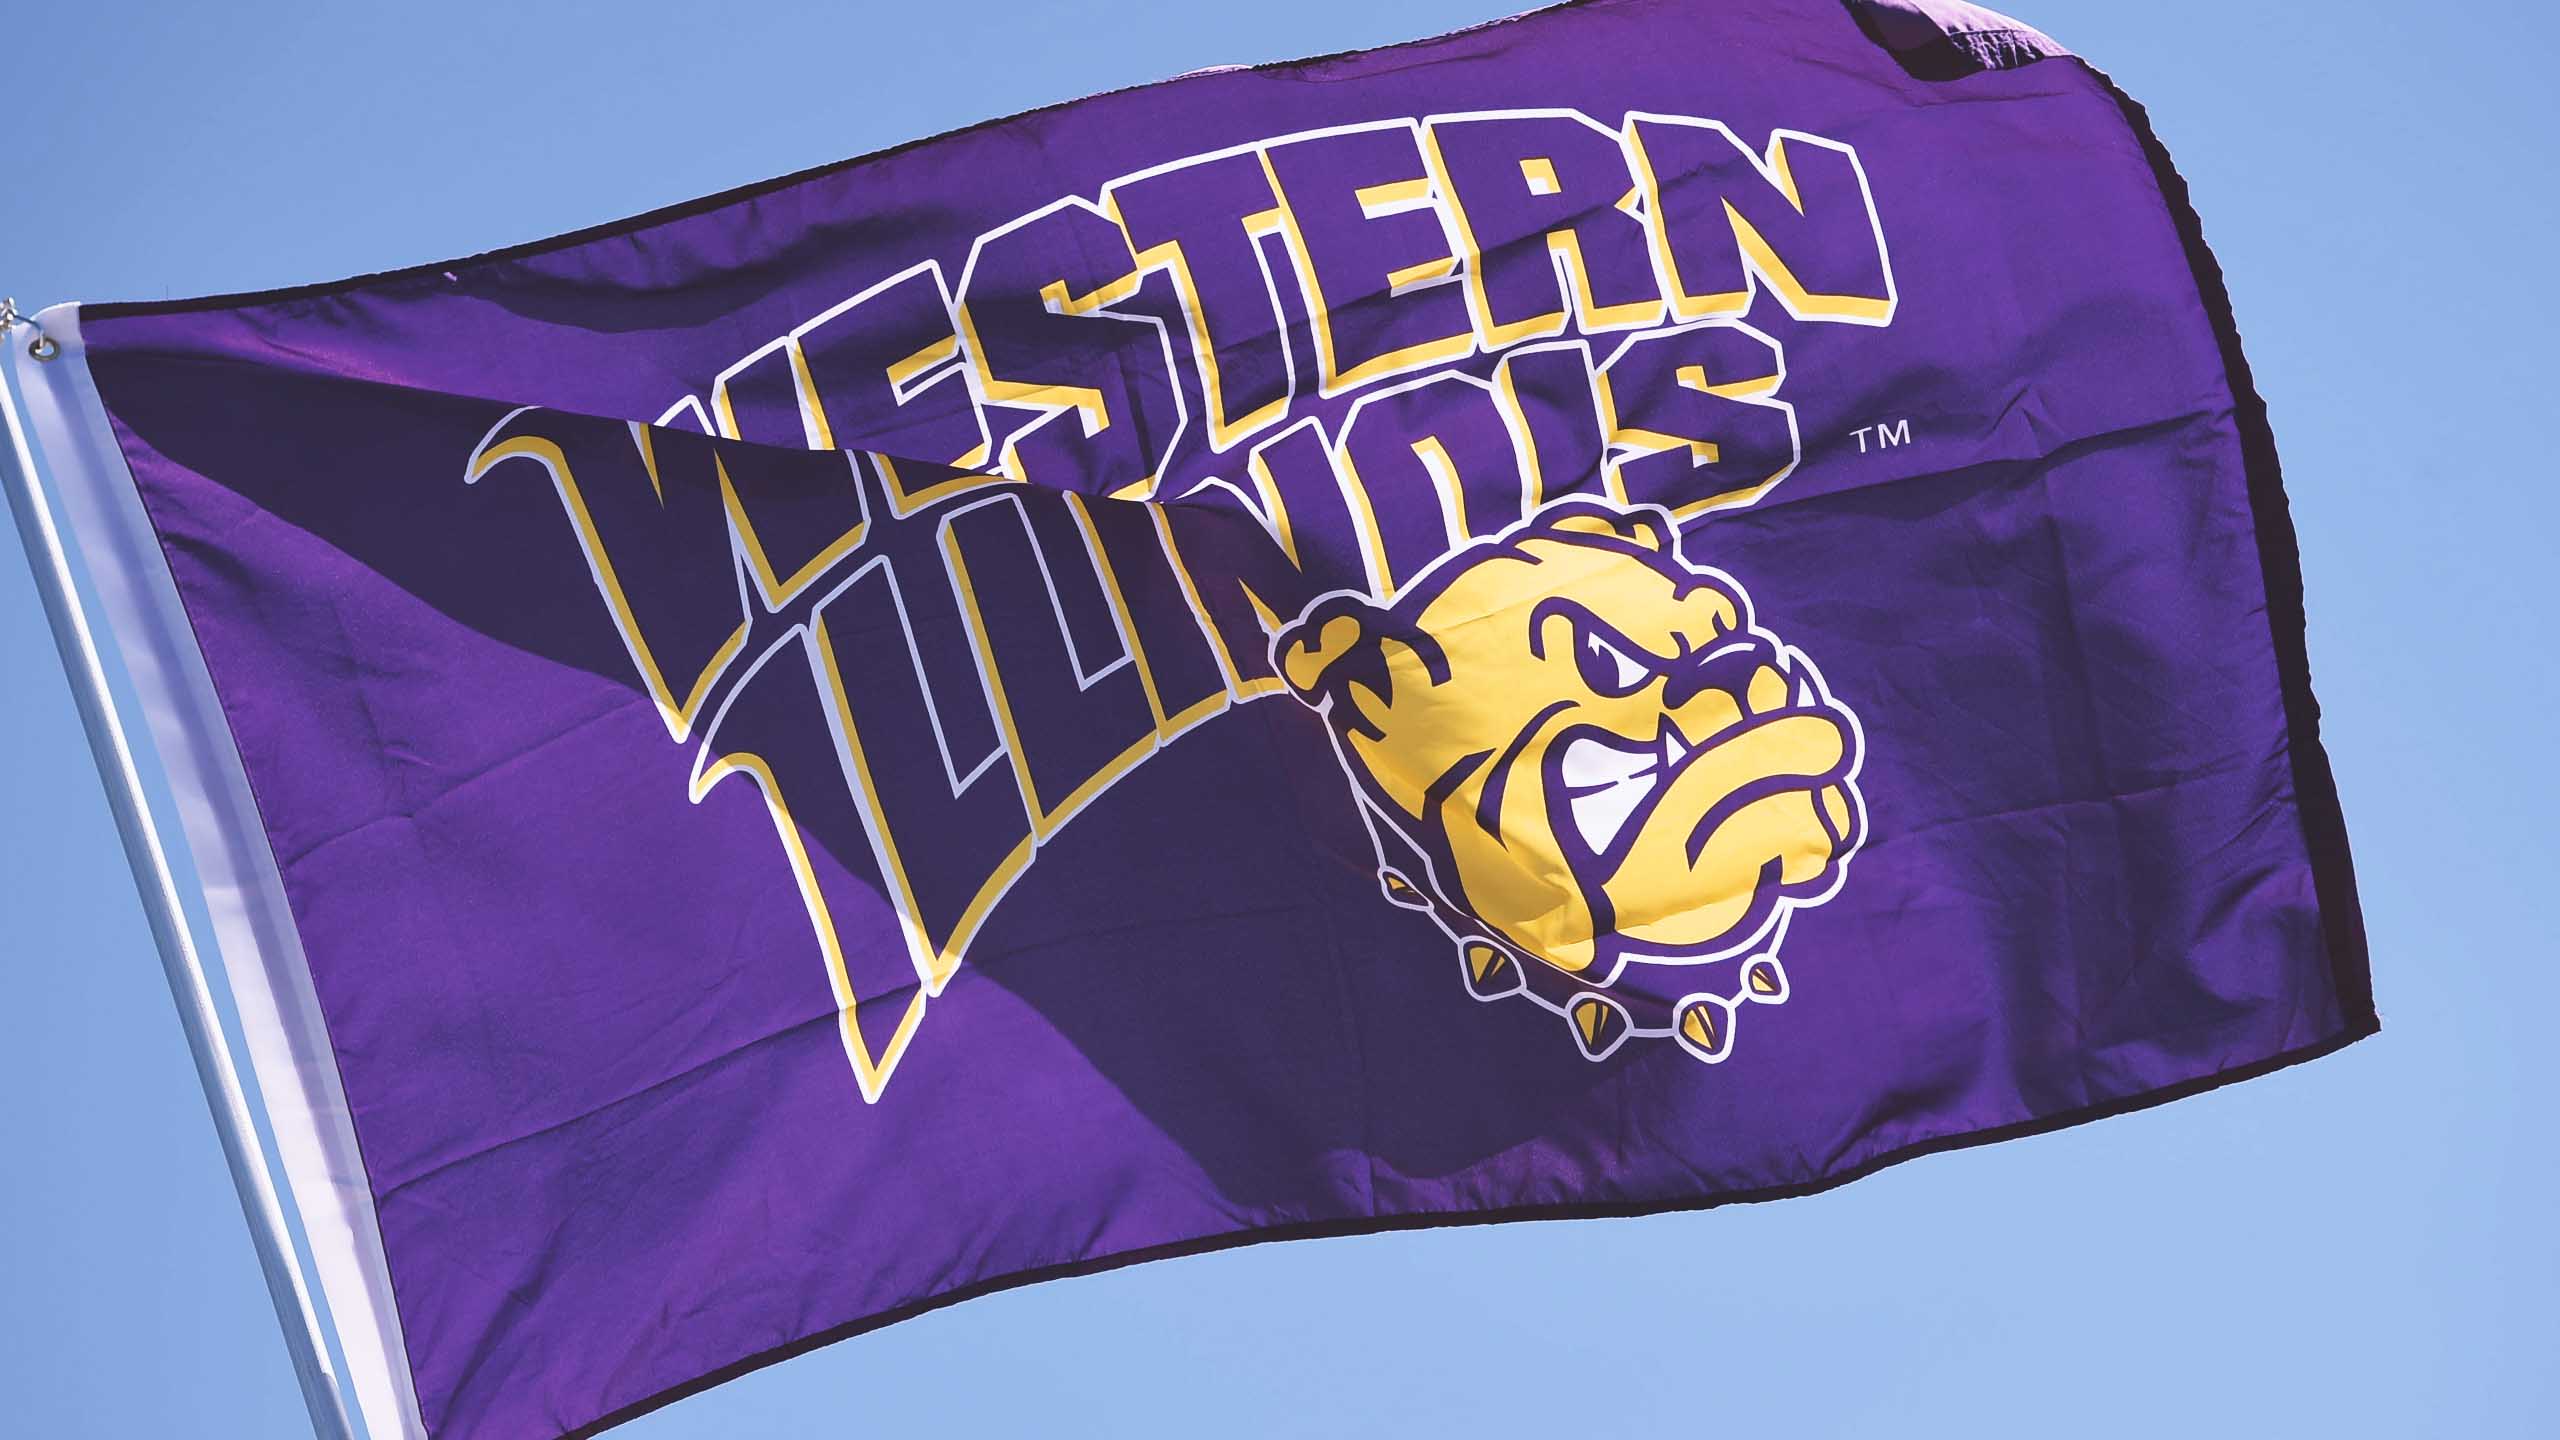 Up&Up welcomes WIU to the client family